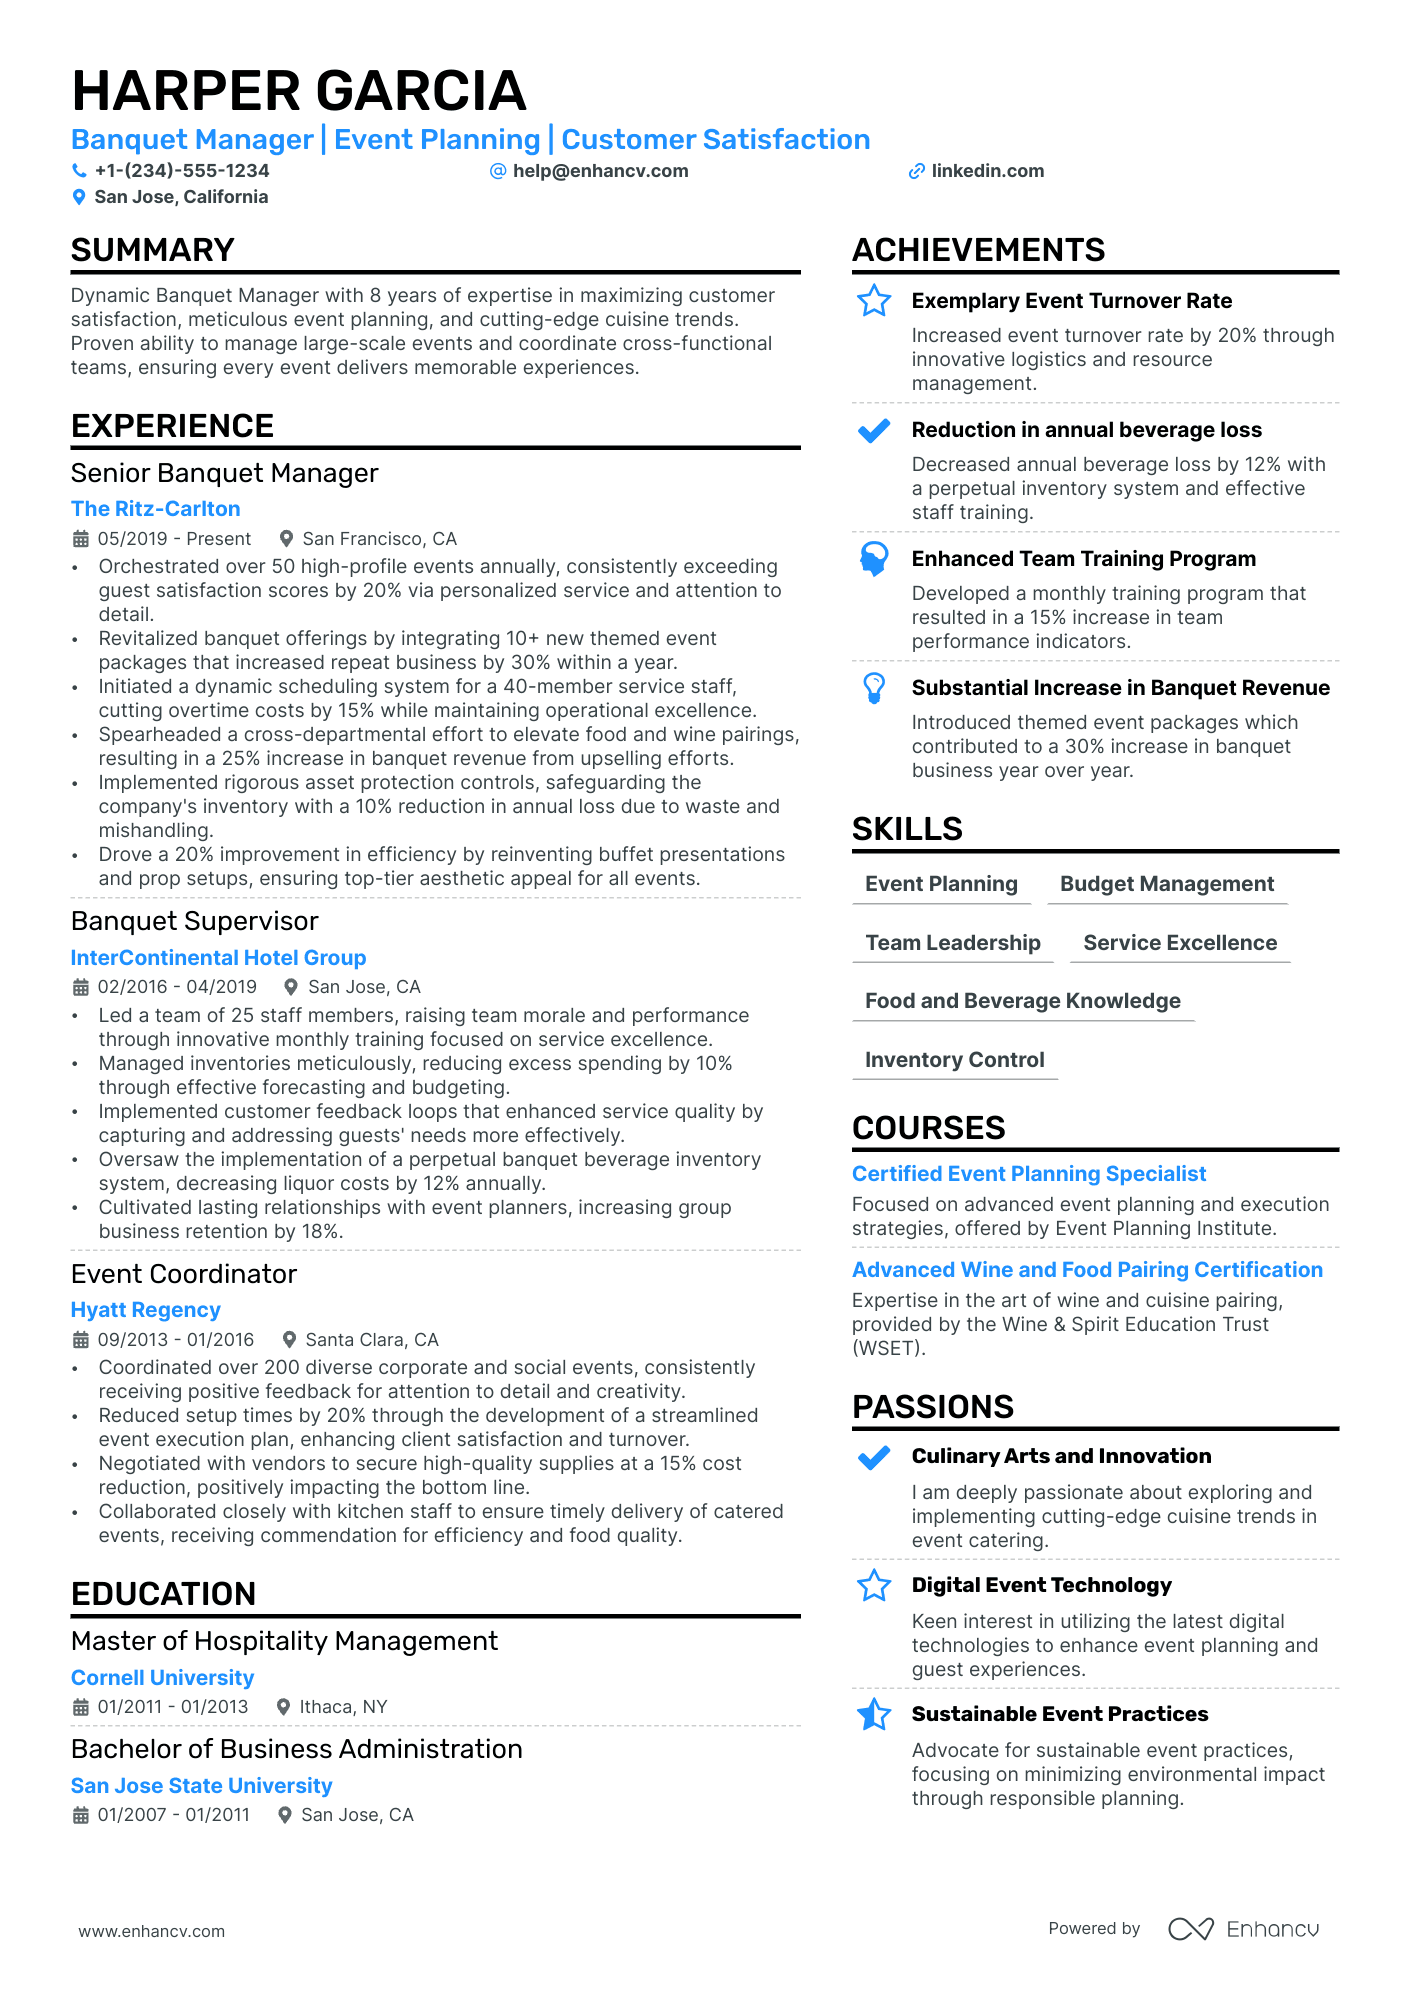 Banquet Manager resume example